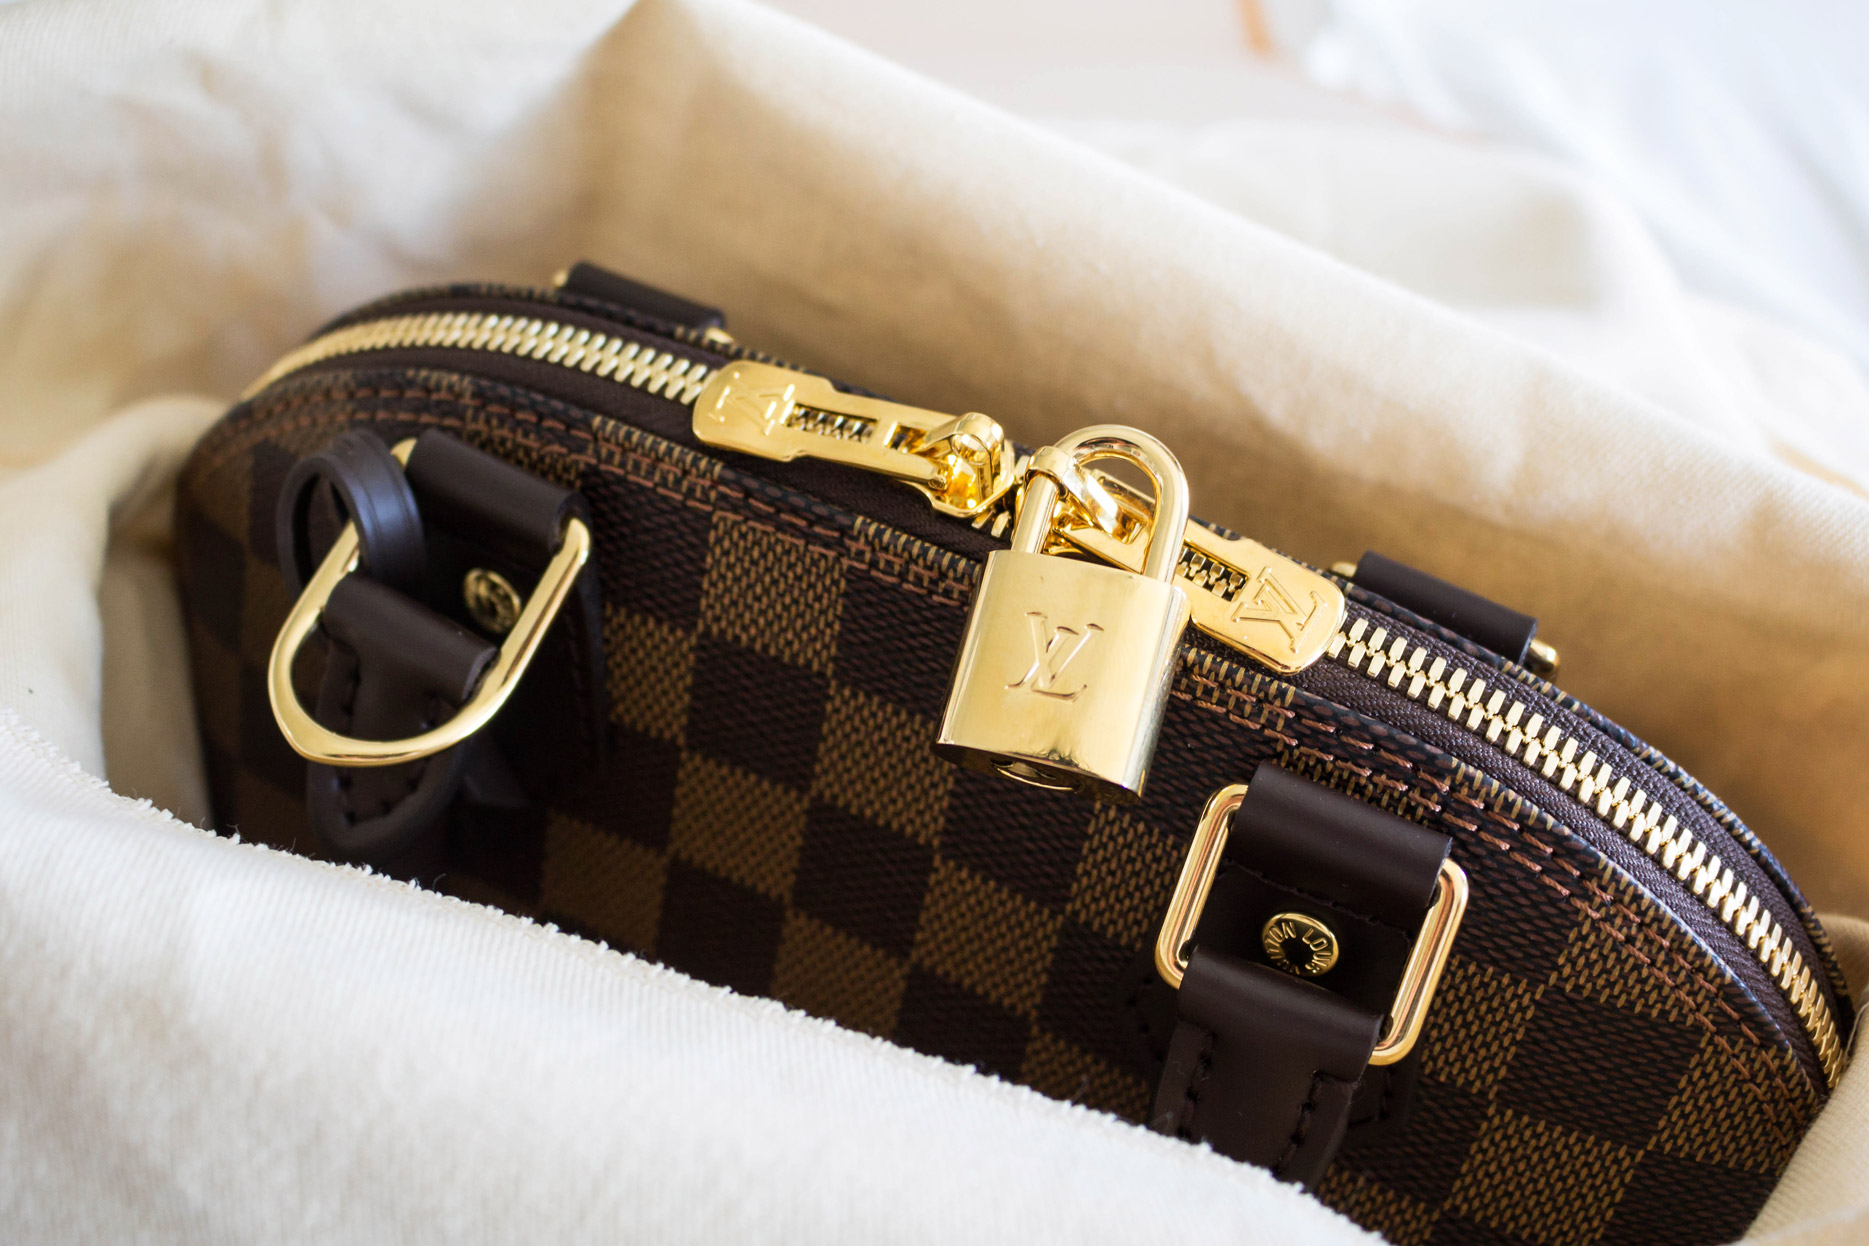 Trendphile - This Louis vuitton Alma bb bag is fit for every looks